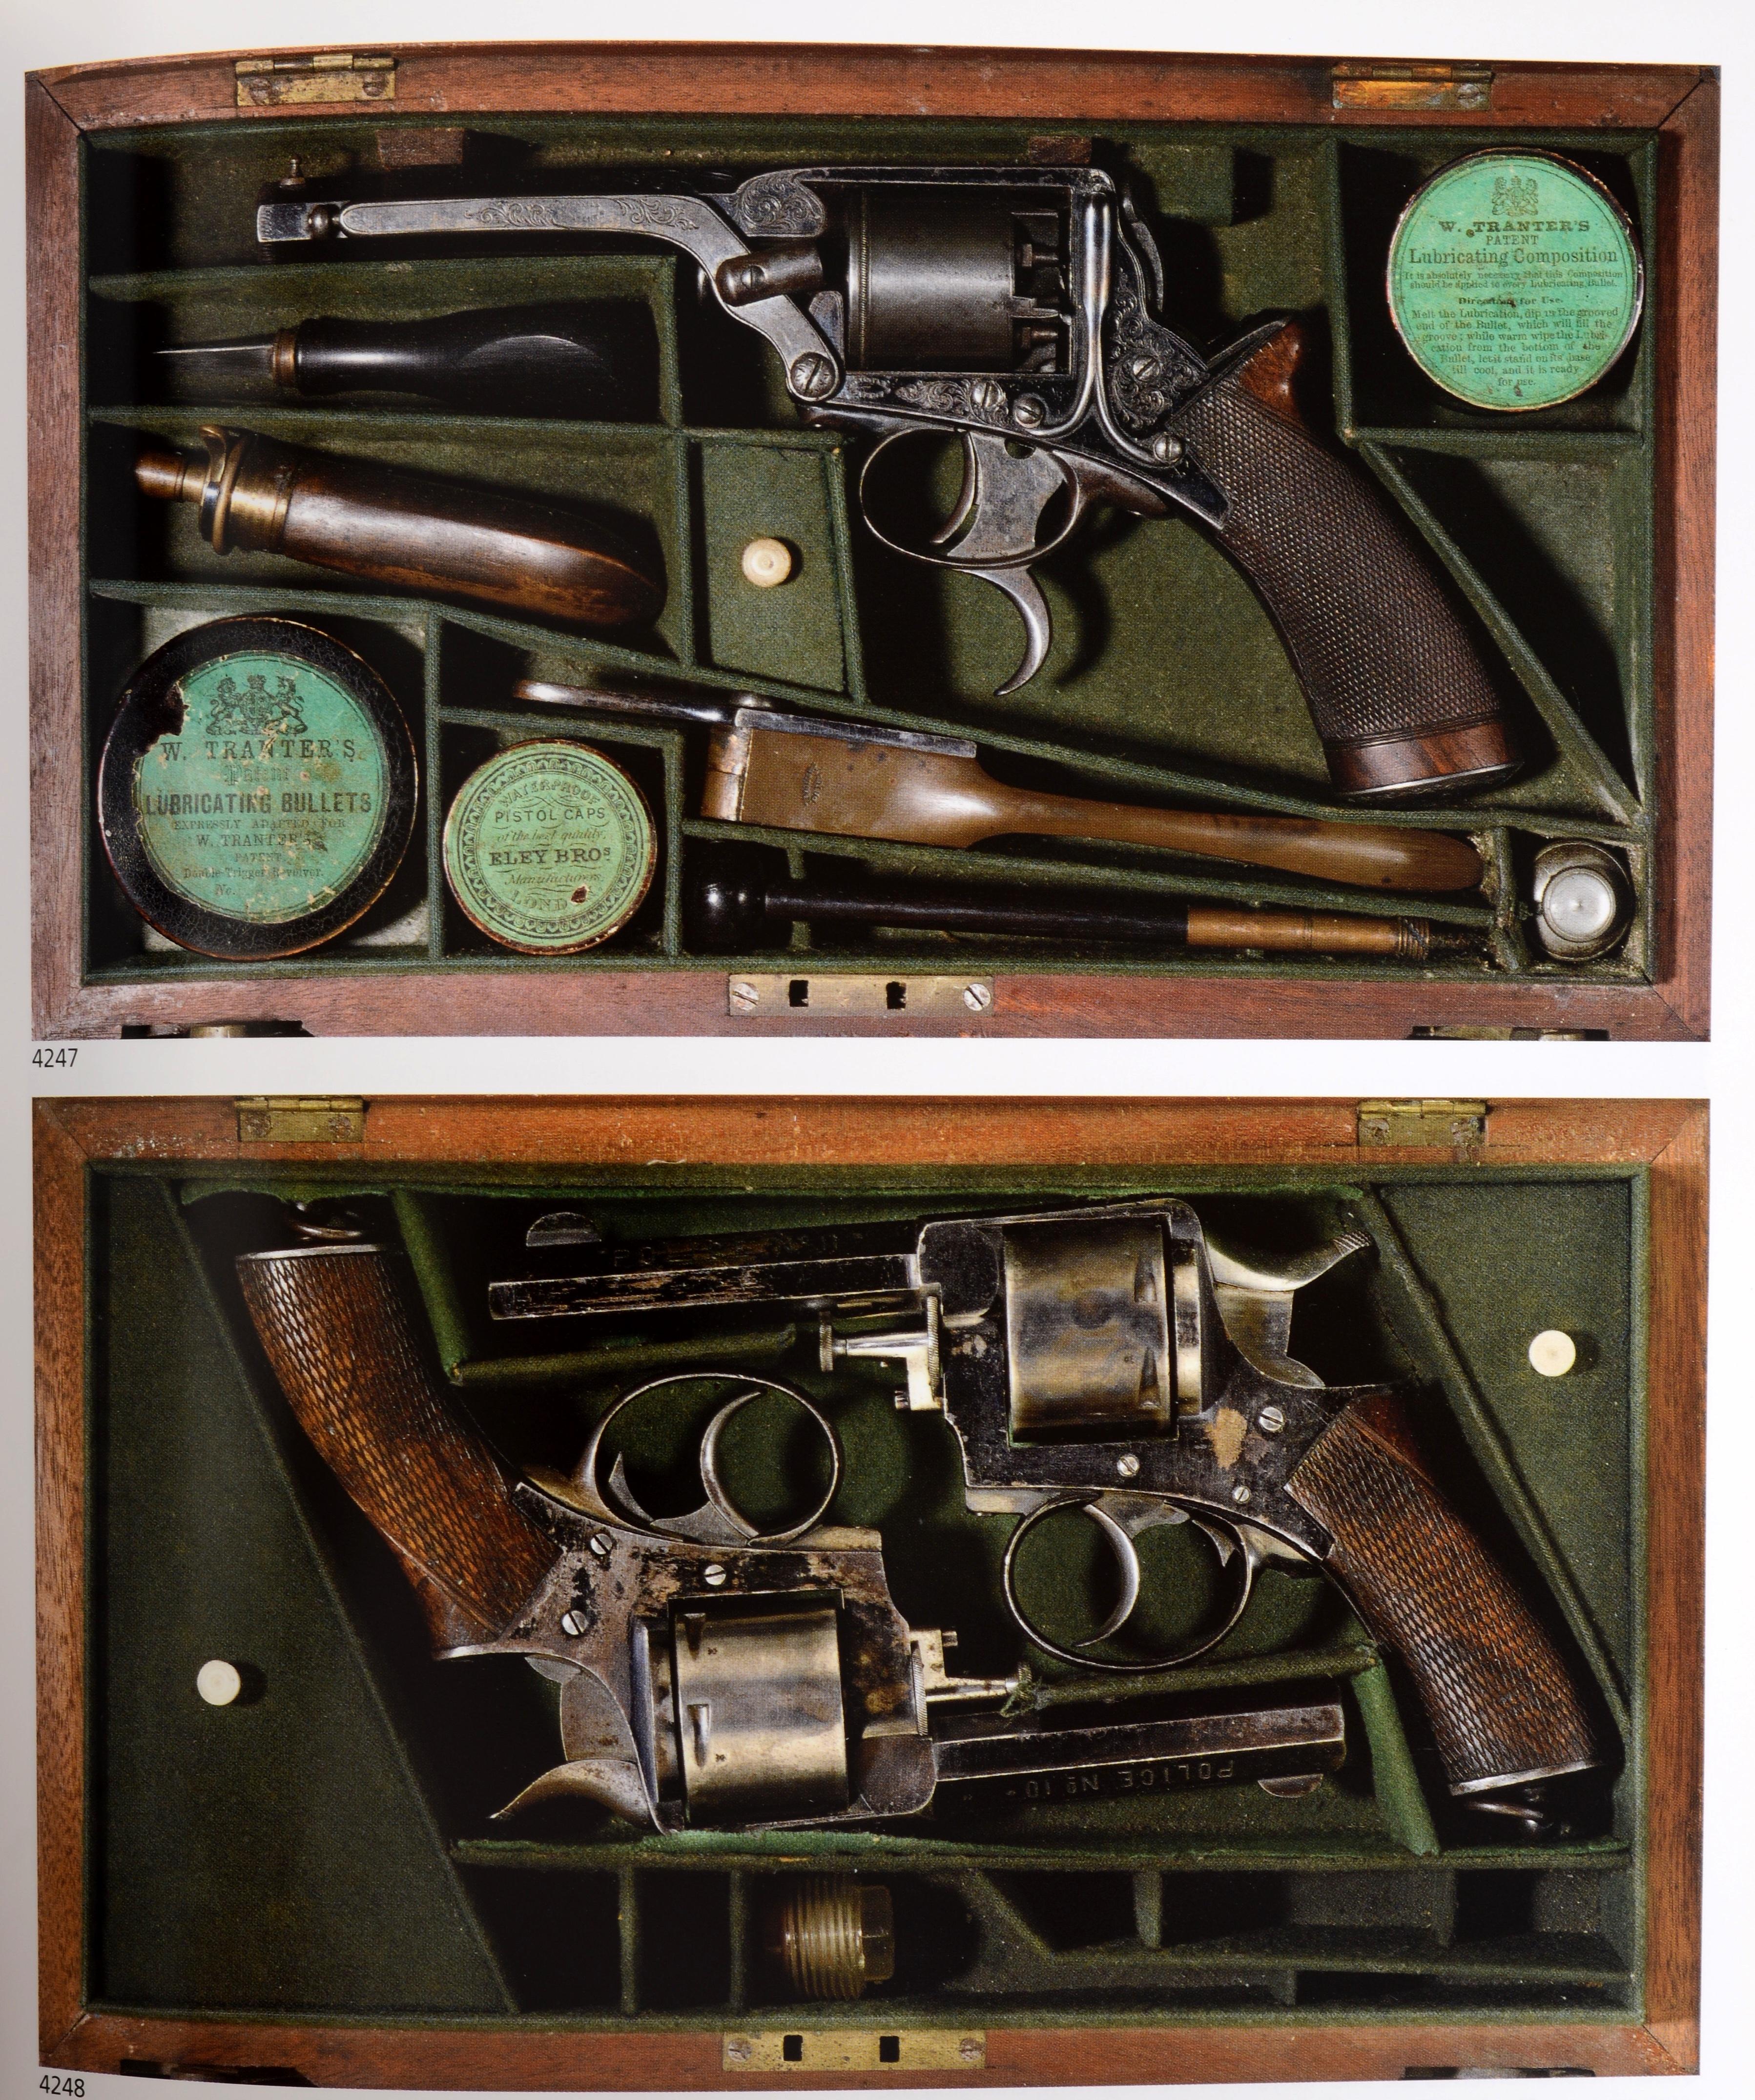 Bonhams 2013 Antique Arms & Armour Featured a Revolver Owned by Wild Bill Hickok For Sale 6